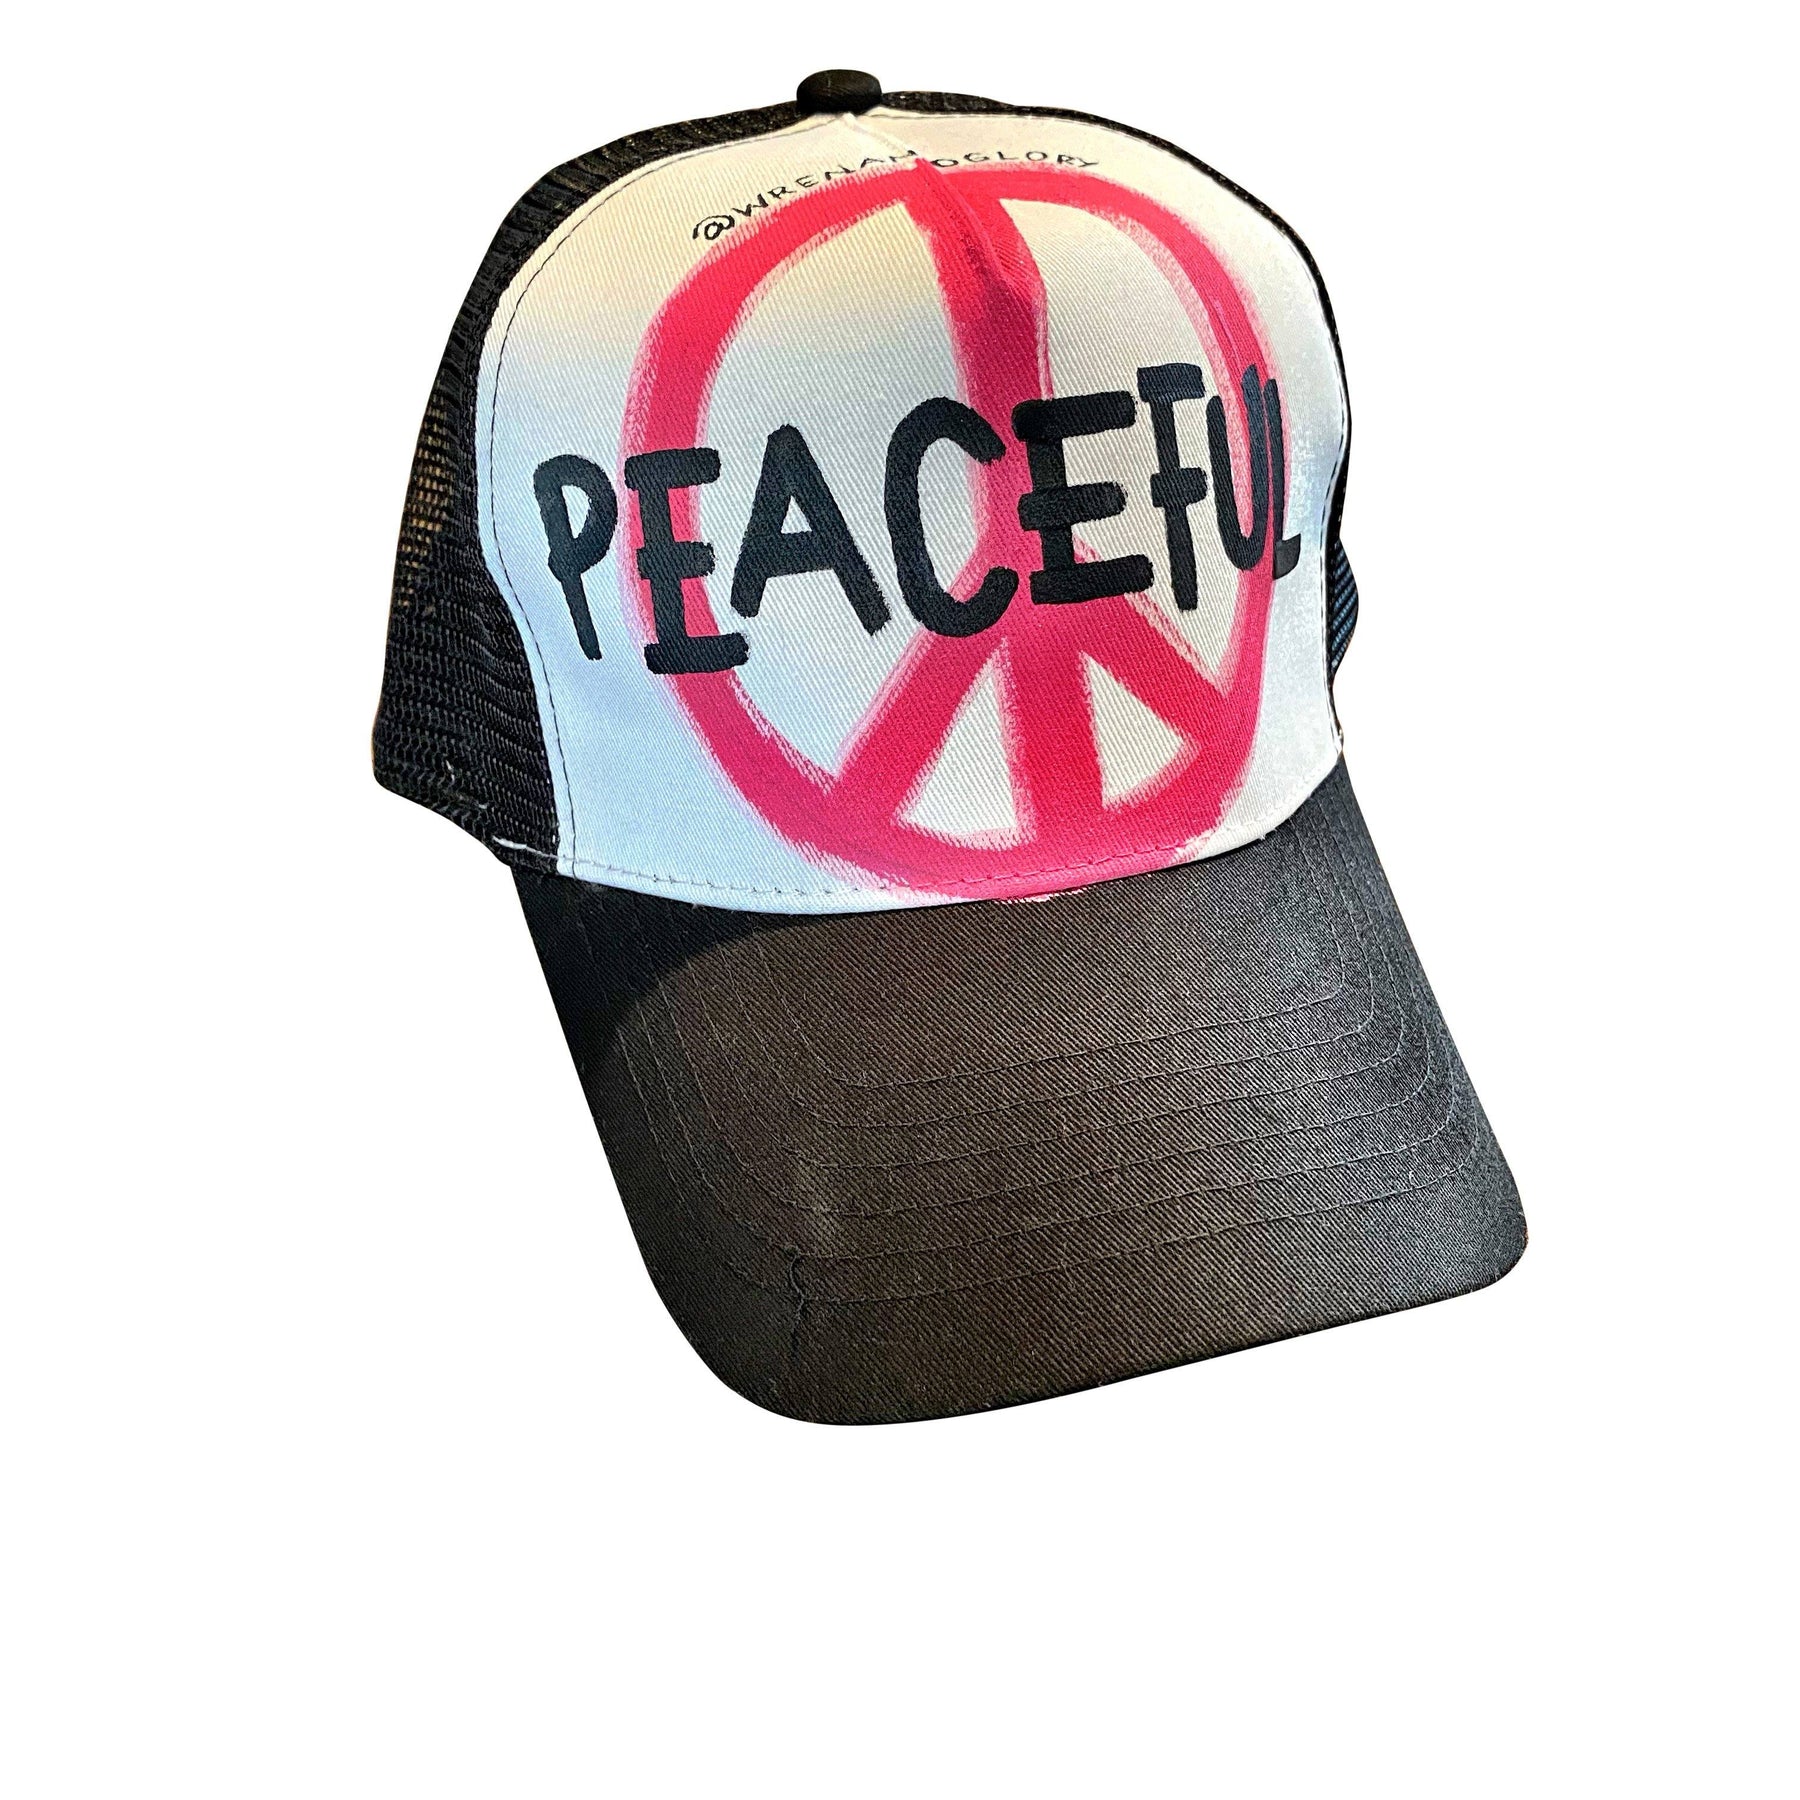 'PEACEFUL' PAINTED HAT